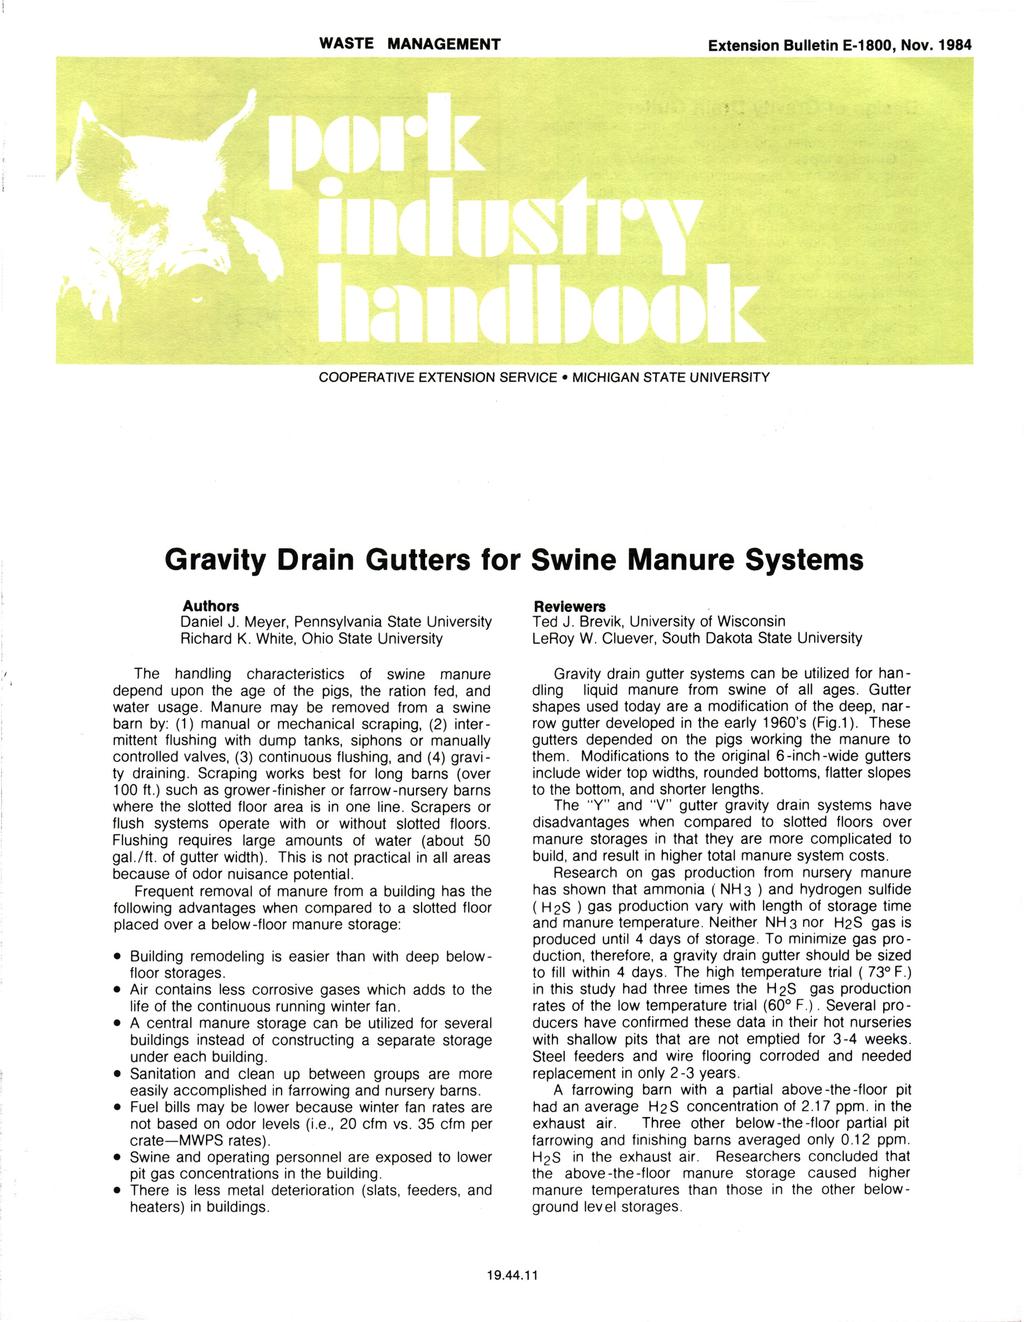 WASTE MANAGEMENT Extension Bulletin E-1800, Nov. 1984 COOPERATIVE EXTENSION SERVICE MICHIGAN STATE UNIVERSITY Gravity Drain Gutters for Swine Manure Systems Authors Daniel J.